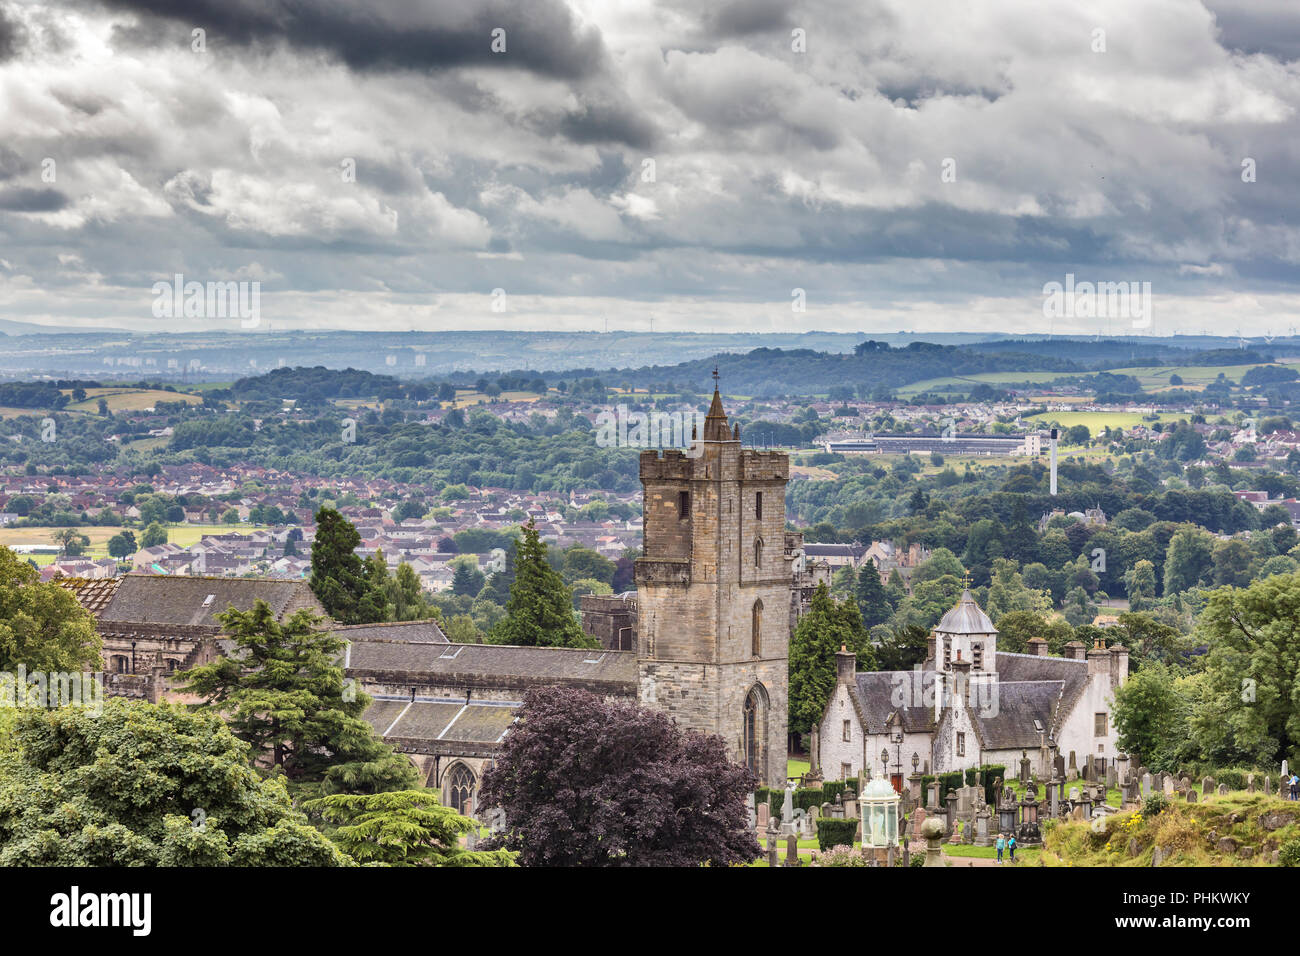 Church of the Holy Rude, Holy Cross, cityscape from Stirling Castle, Stirlingshire, Scotland, UK Stock Photo